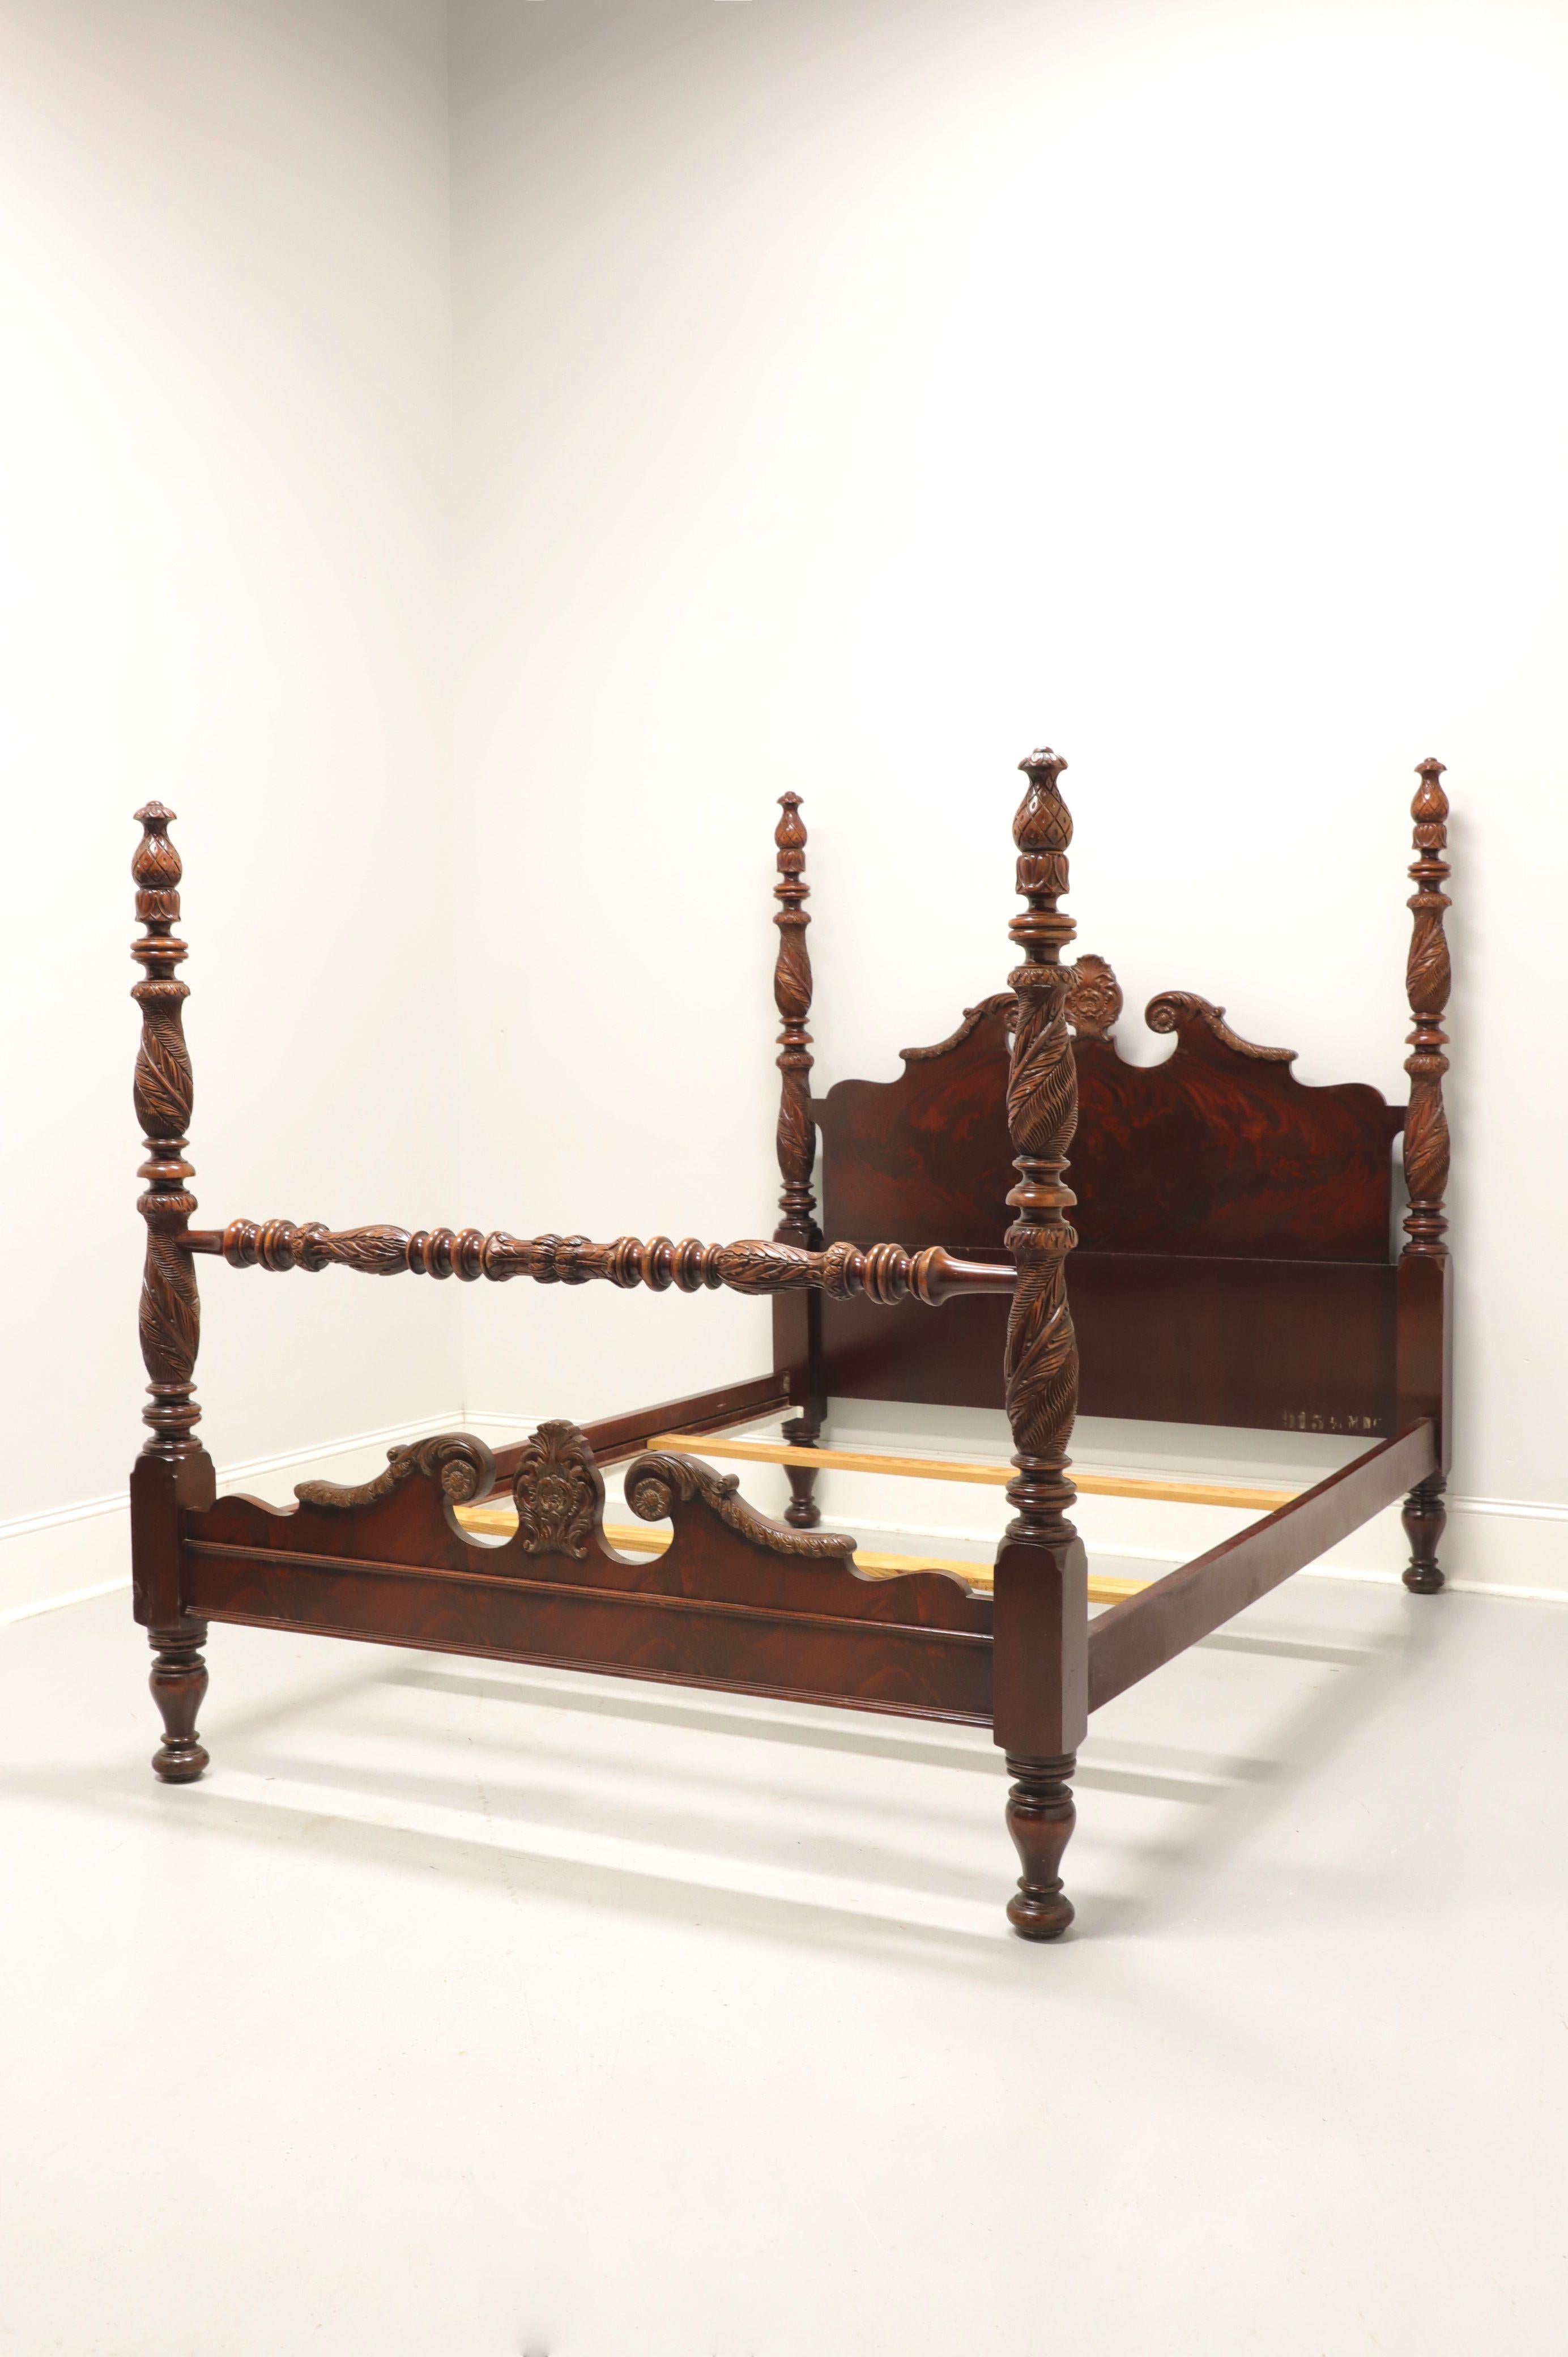 An antique Victorian style full size four poster bed, unbranded. Walnut and walnut veneers with four elaborately carved posts capped with pineapple shaped fixed finials, solid headboard with pediment shape & carved top, low carved footboard with